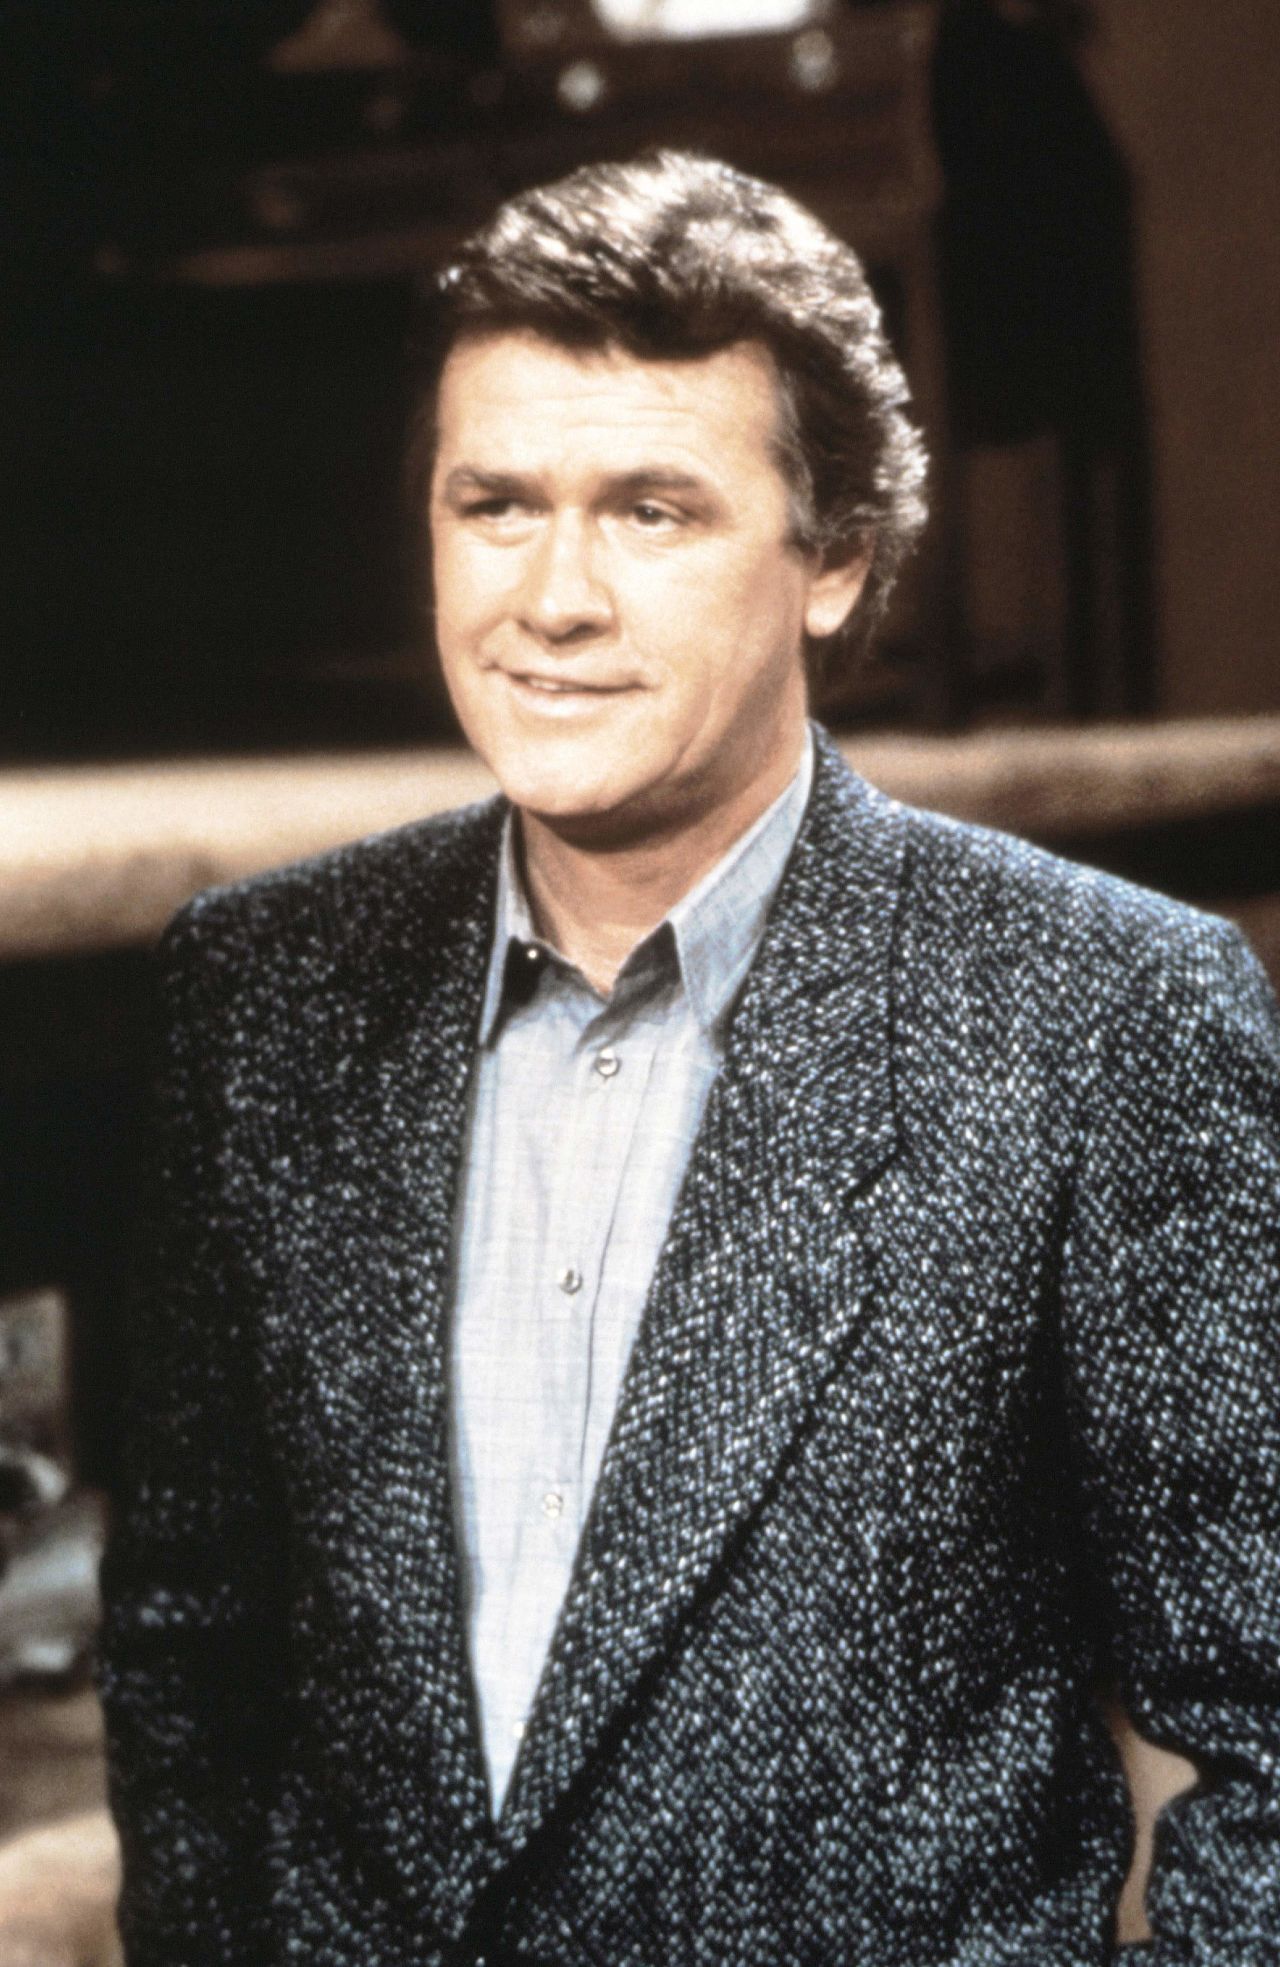 <a href="https://www.cnn.com/2021/01/11/entertainment/john-reilly-actor-death-trnd/index.html" target="_blank">John Reilly,</a> a longtime soap-opera actor known for his time on "General Hospital," died on January 9, his daughter confirmed to CNN. He was 86.